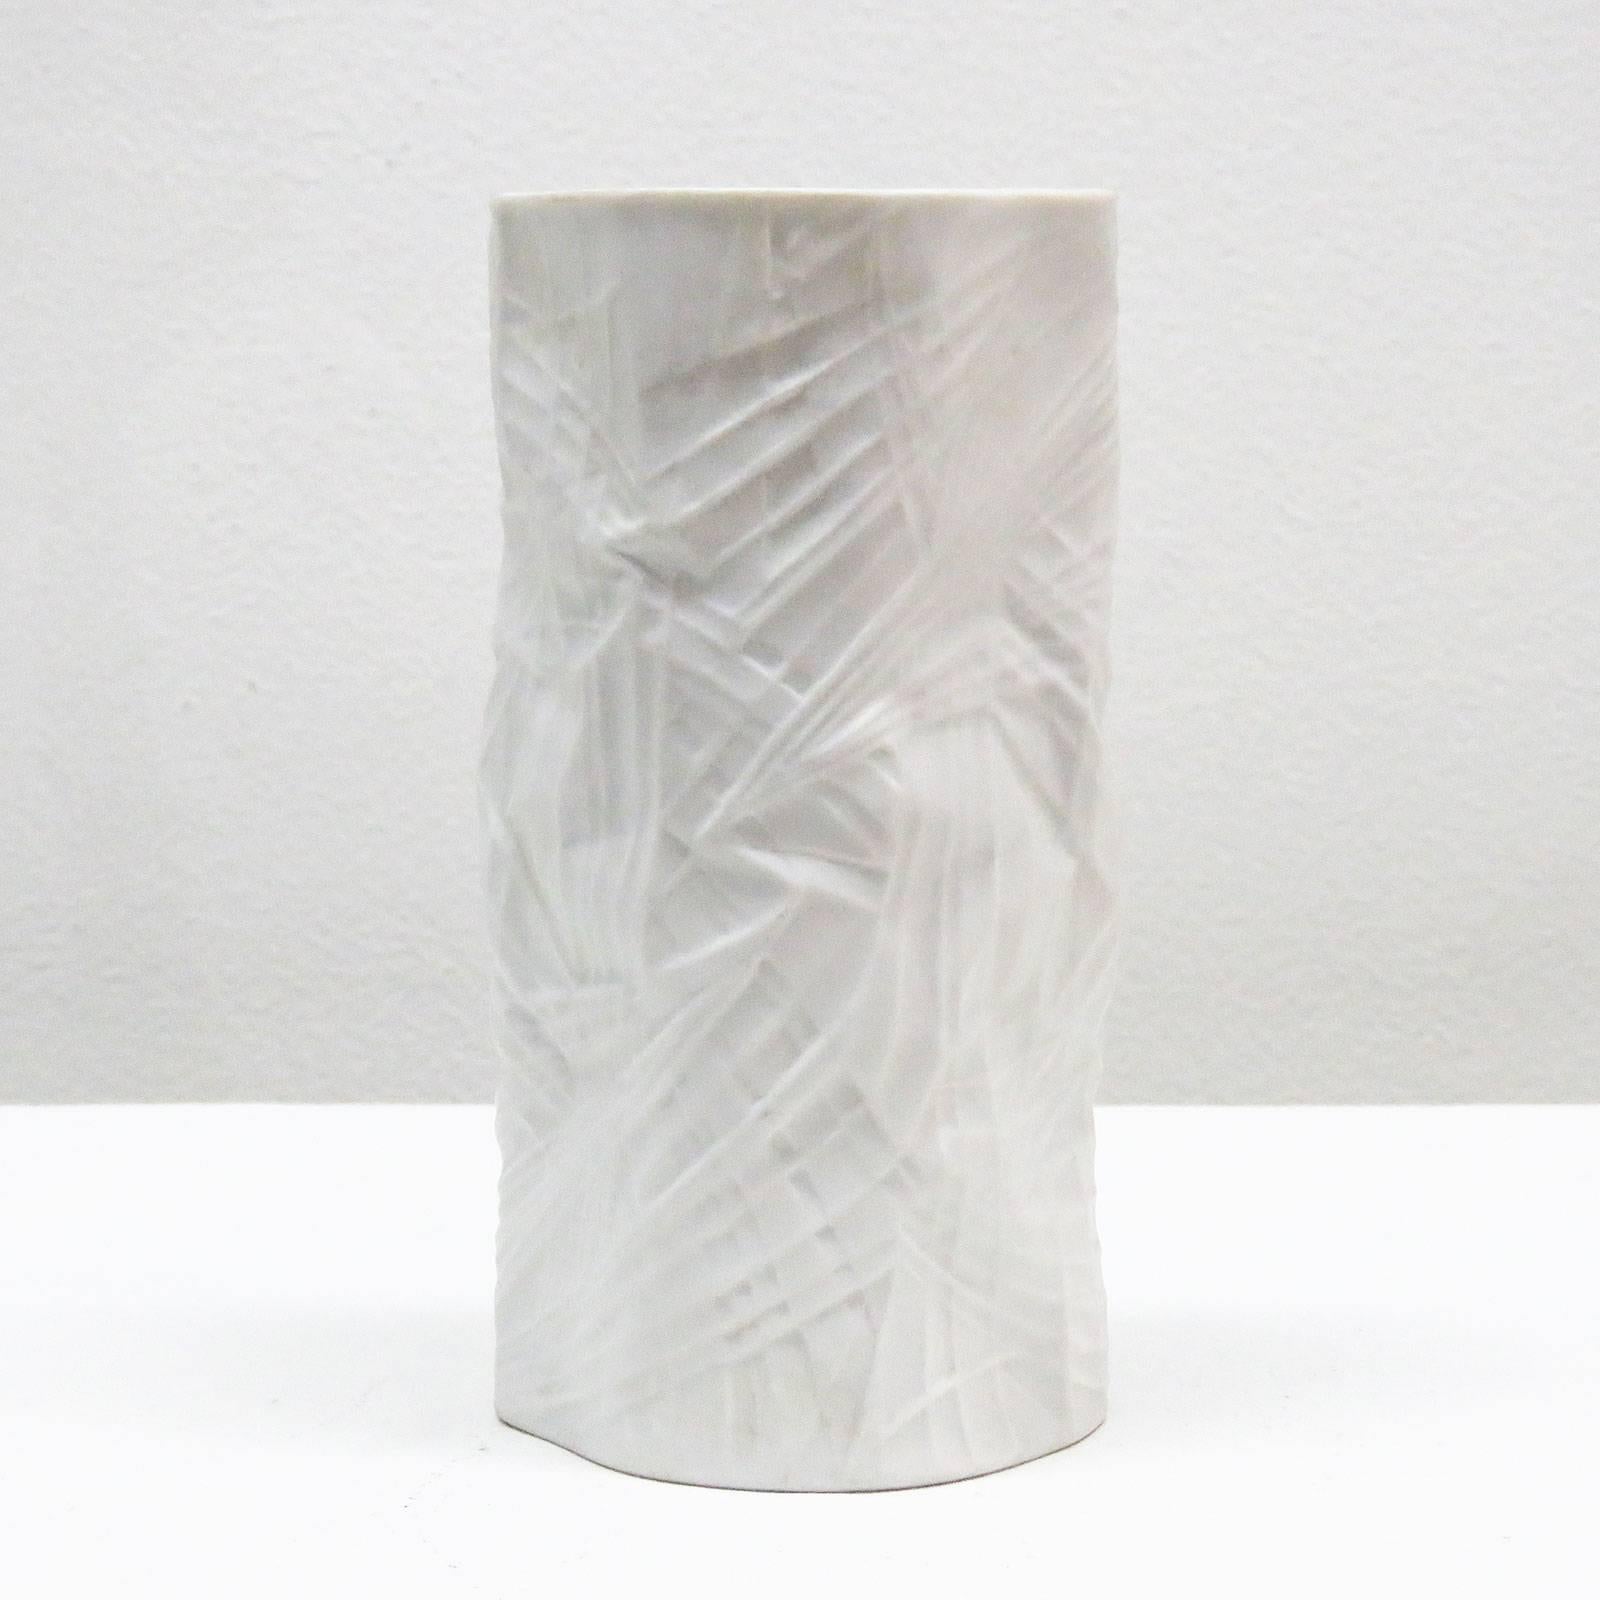 Wonderful, organic, matte porcelain vase by Martin Freyer for Rosenthal Studioline with a wrapped textile pattern look and glazed interior, marked.